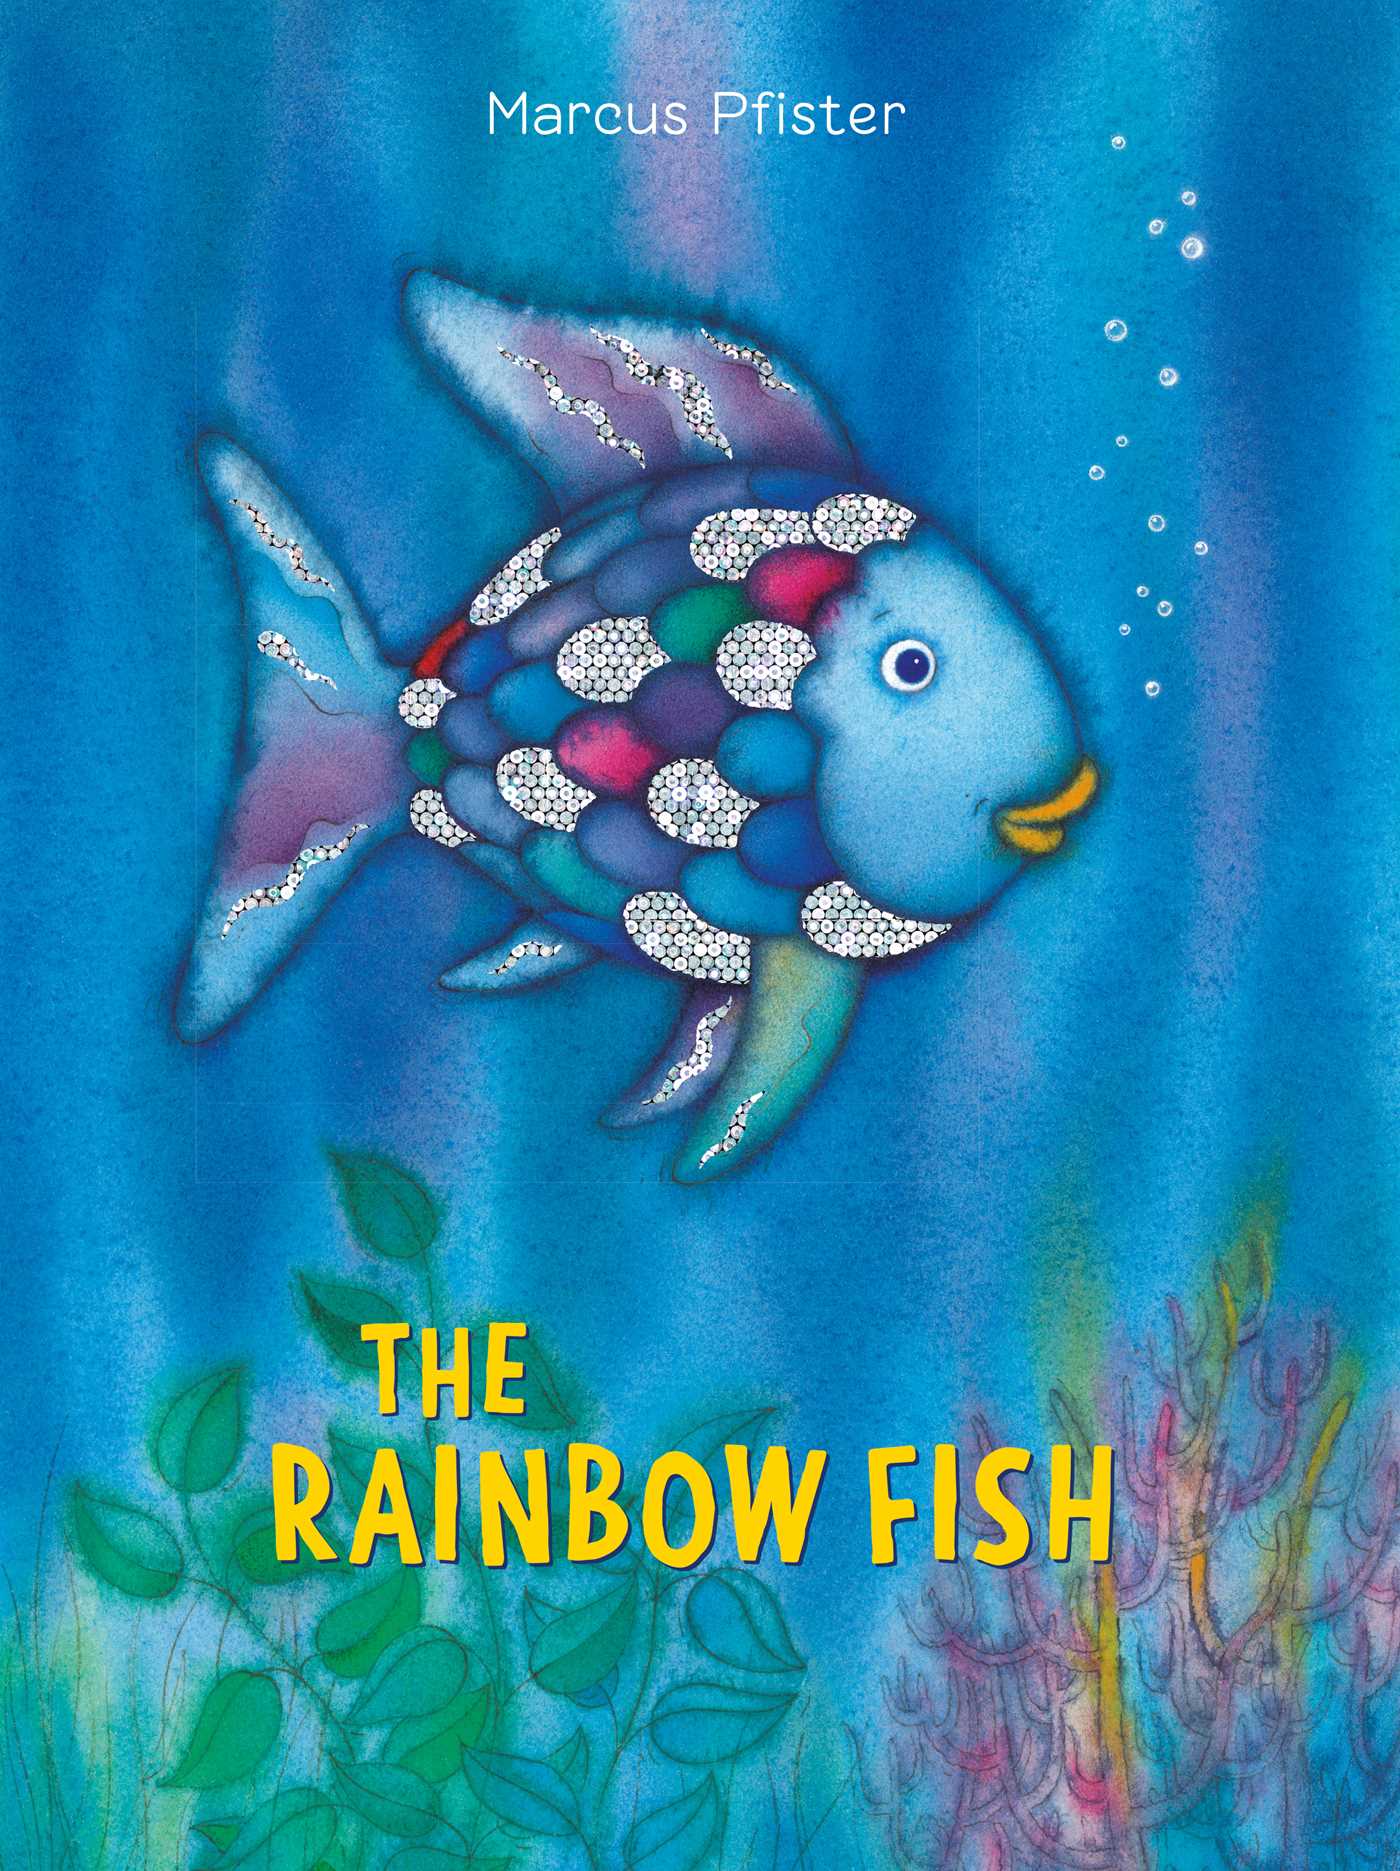 cover of book is a multicolored fish underwater, with title, and author's name